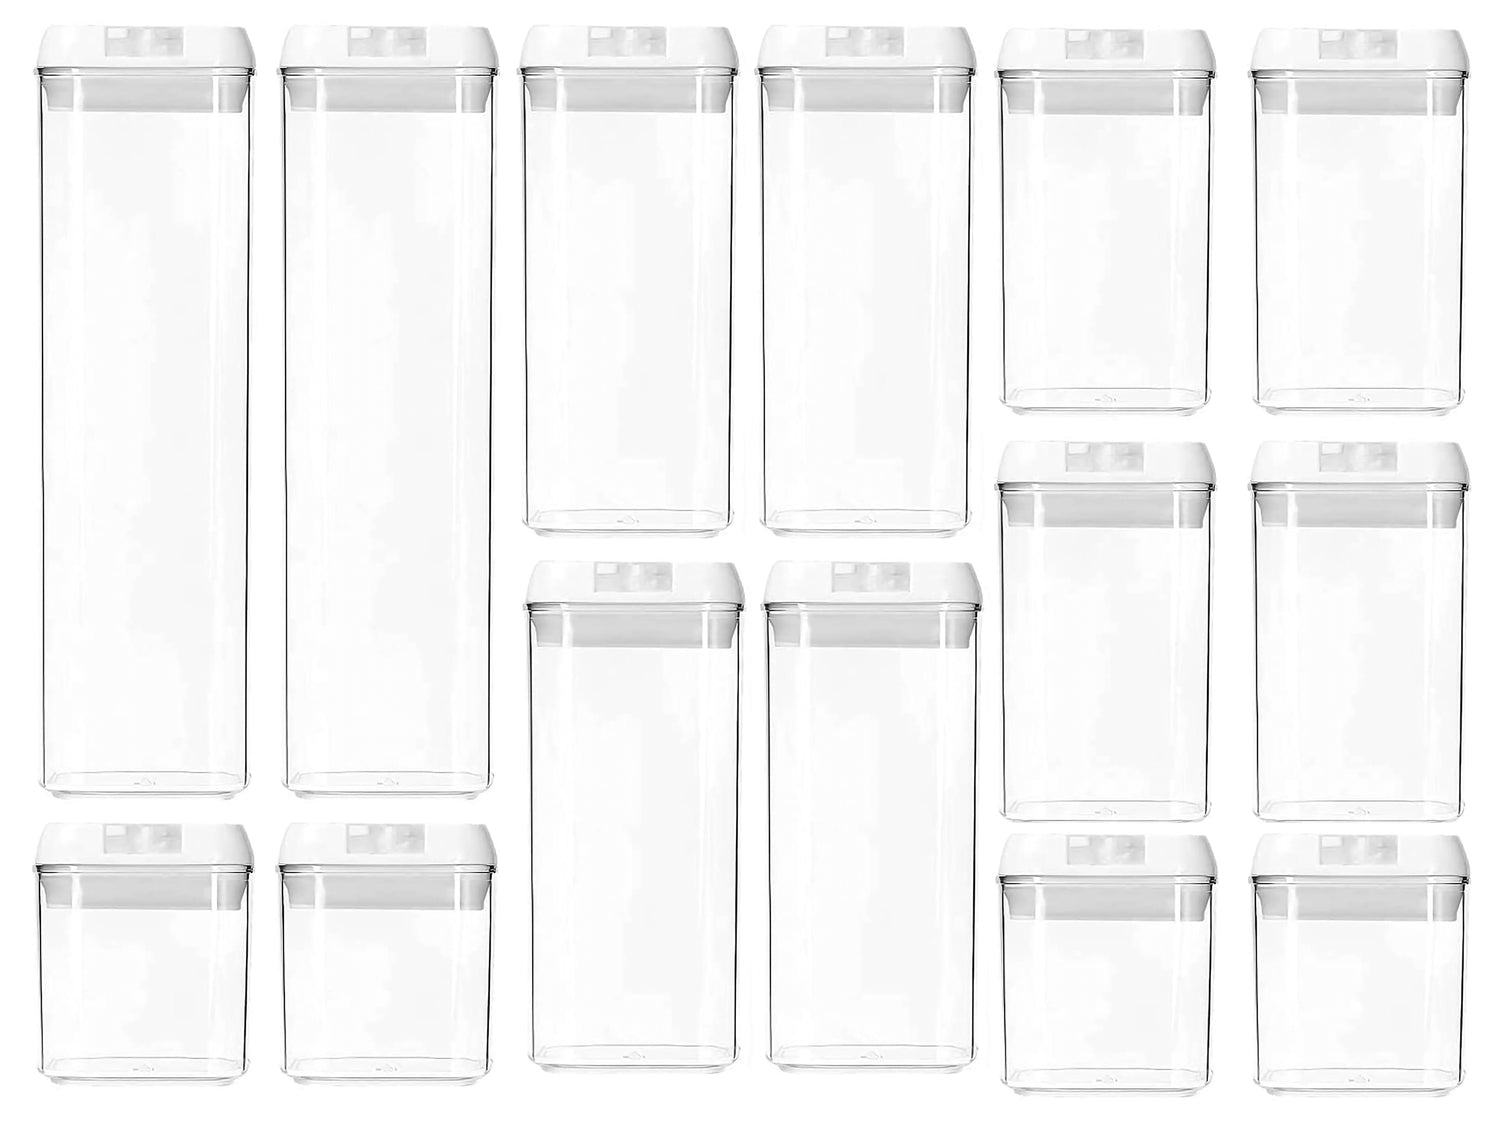 Food Storage Containers with Lids Airtight 14 Piece, Plastic Food